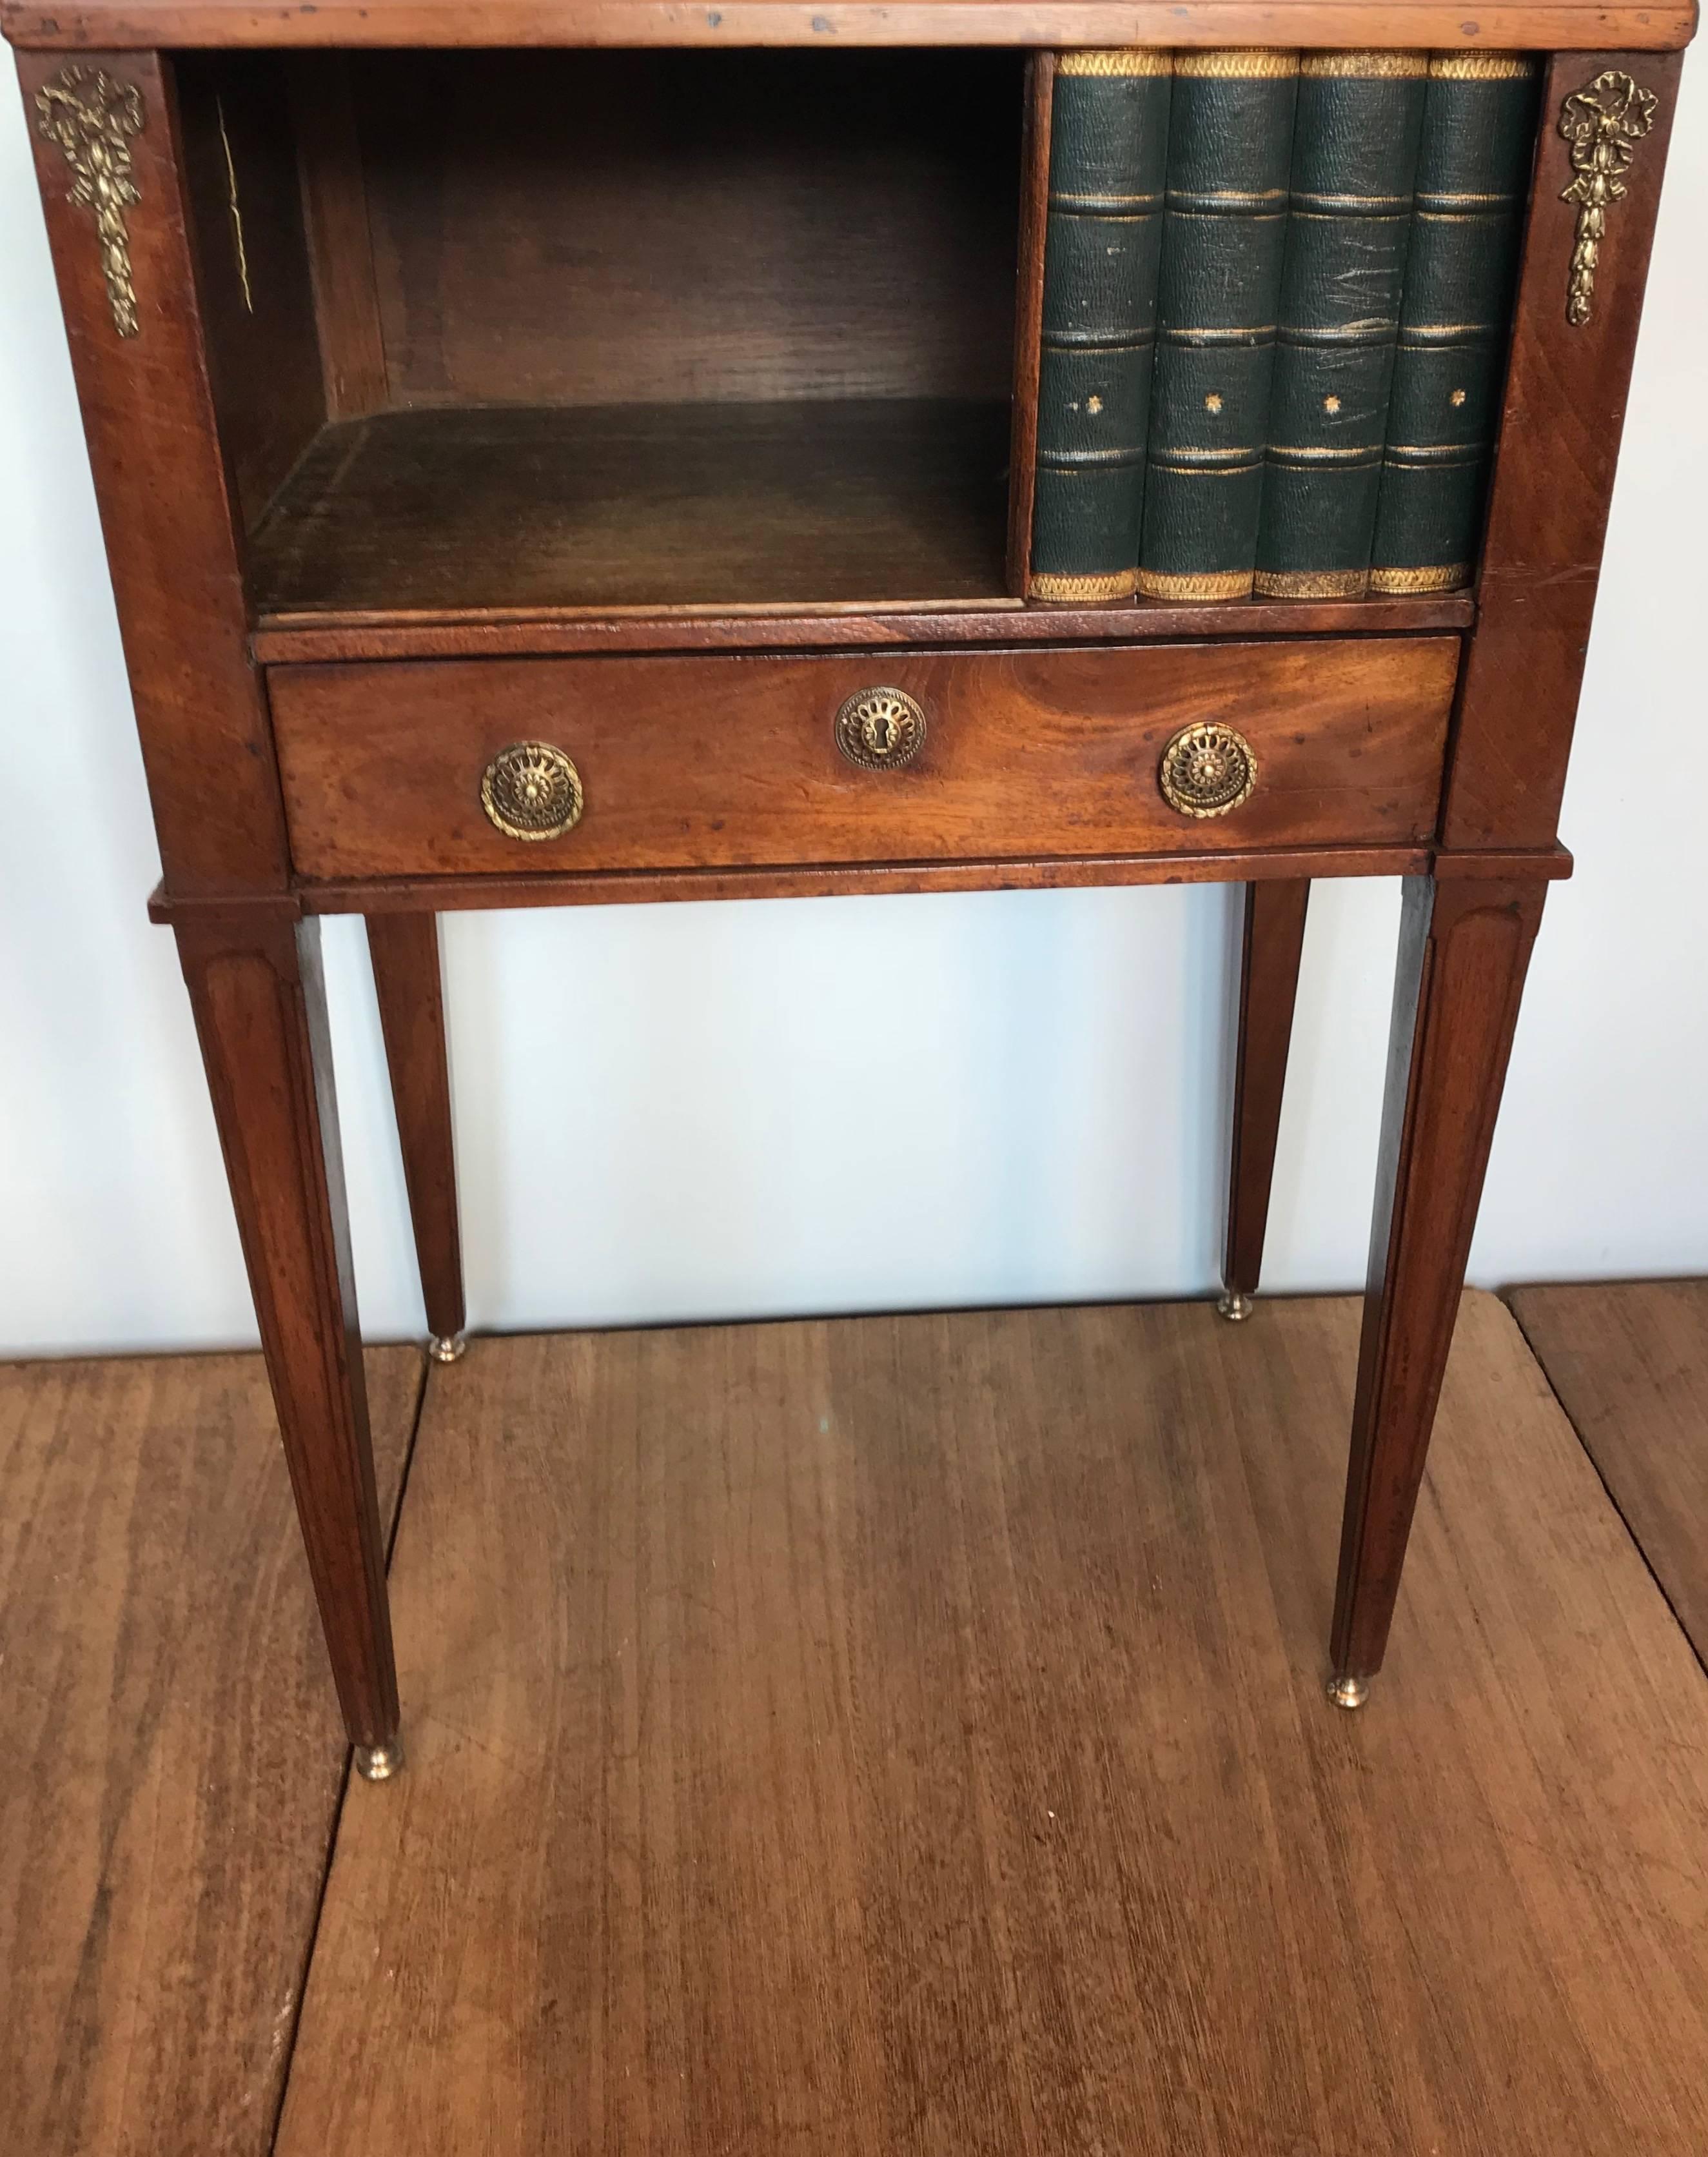 European Empire Style Mahogany End Table with Faux Books Rolling Shutter Door and Drawer